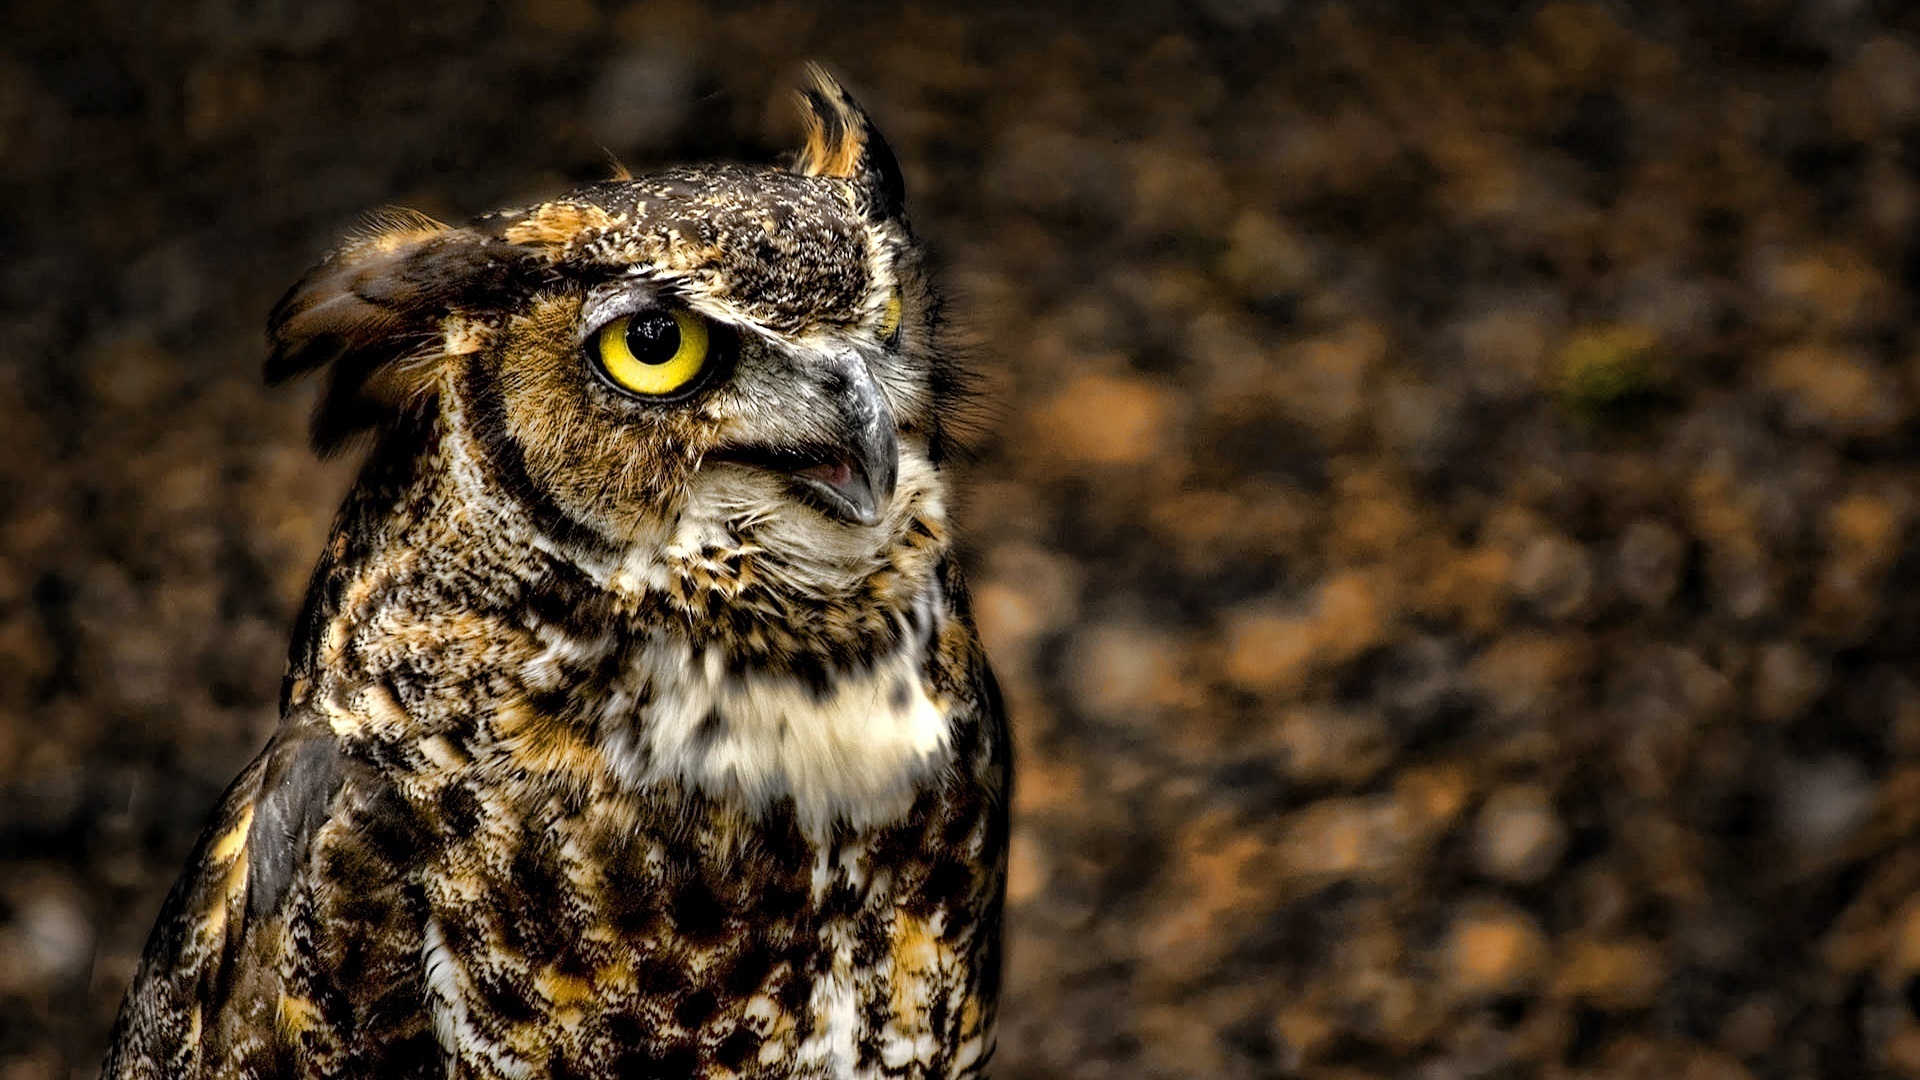 Animal owl backgrounds free download.